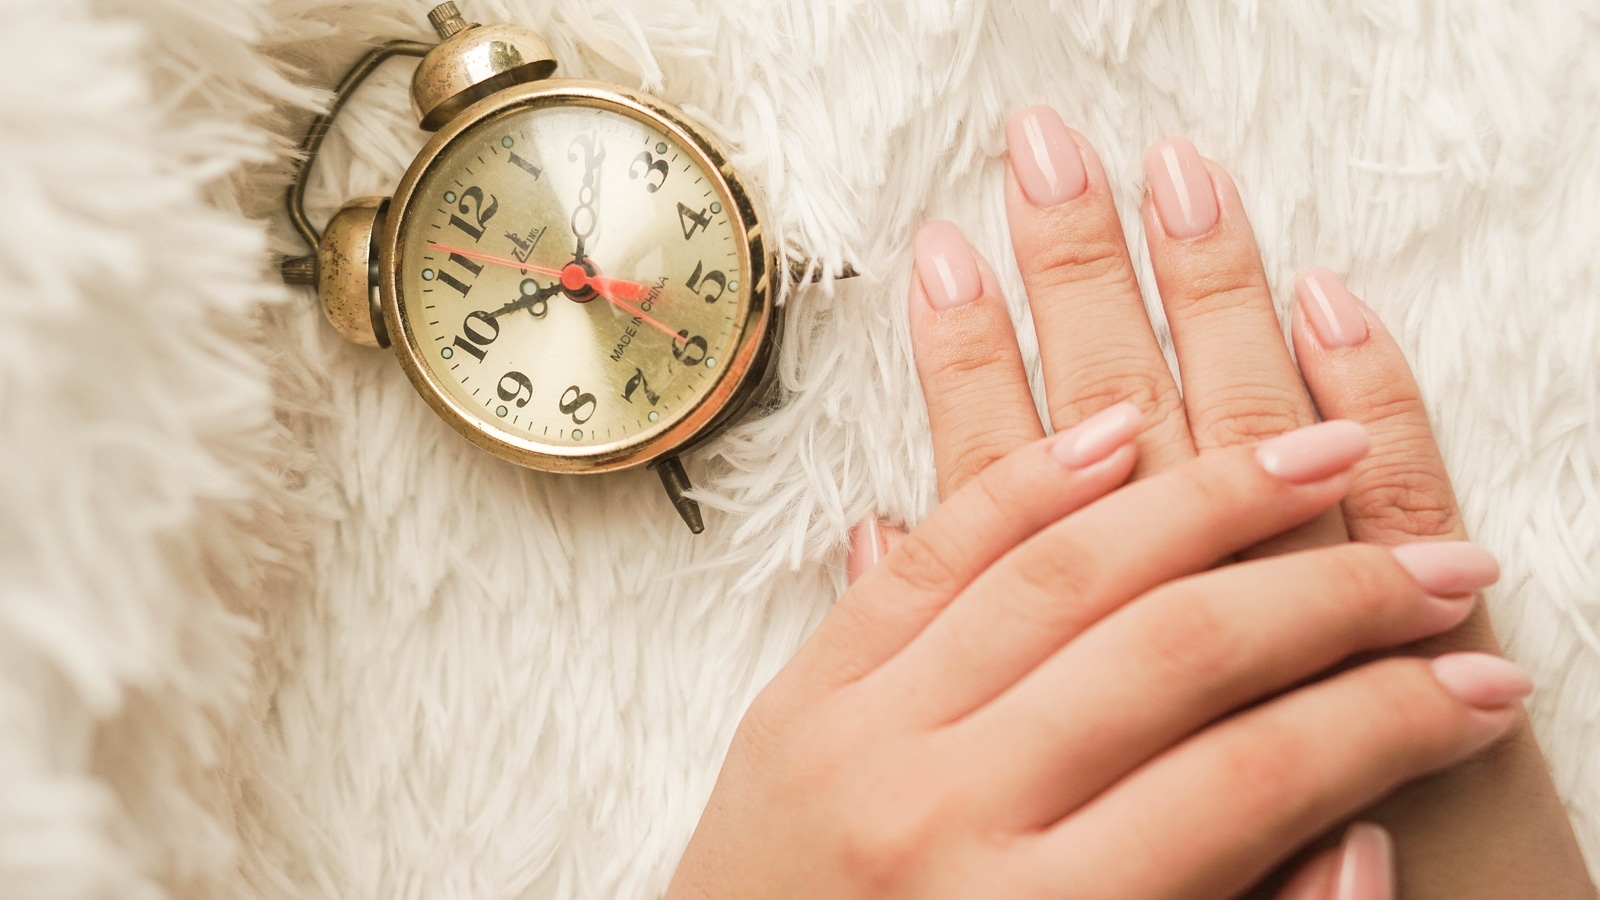 5 tips to take care of your nails in monsoon